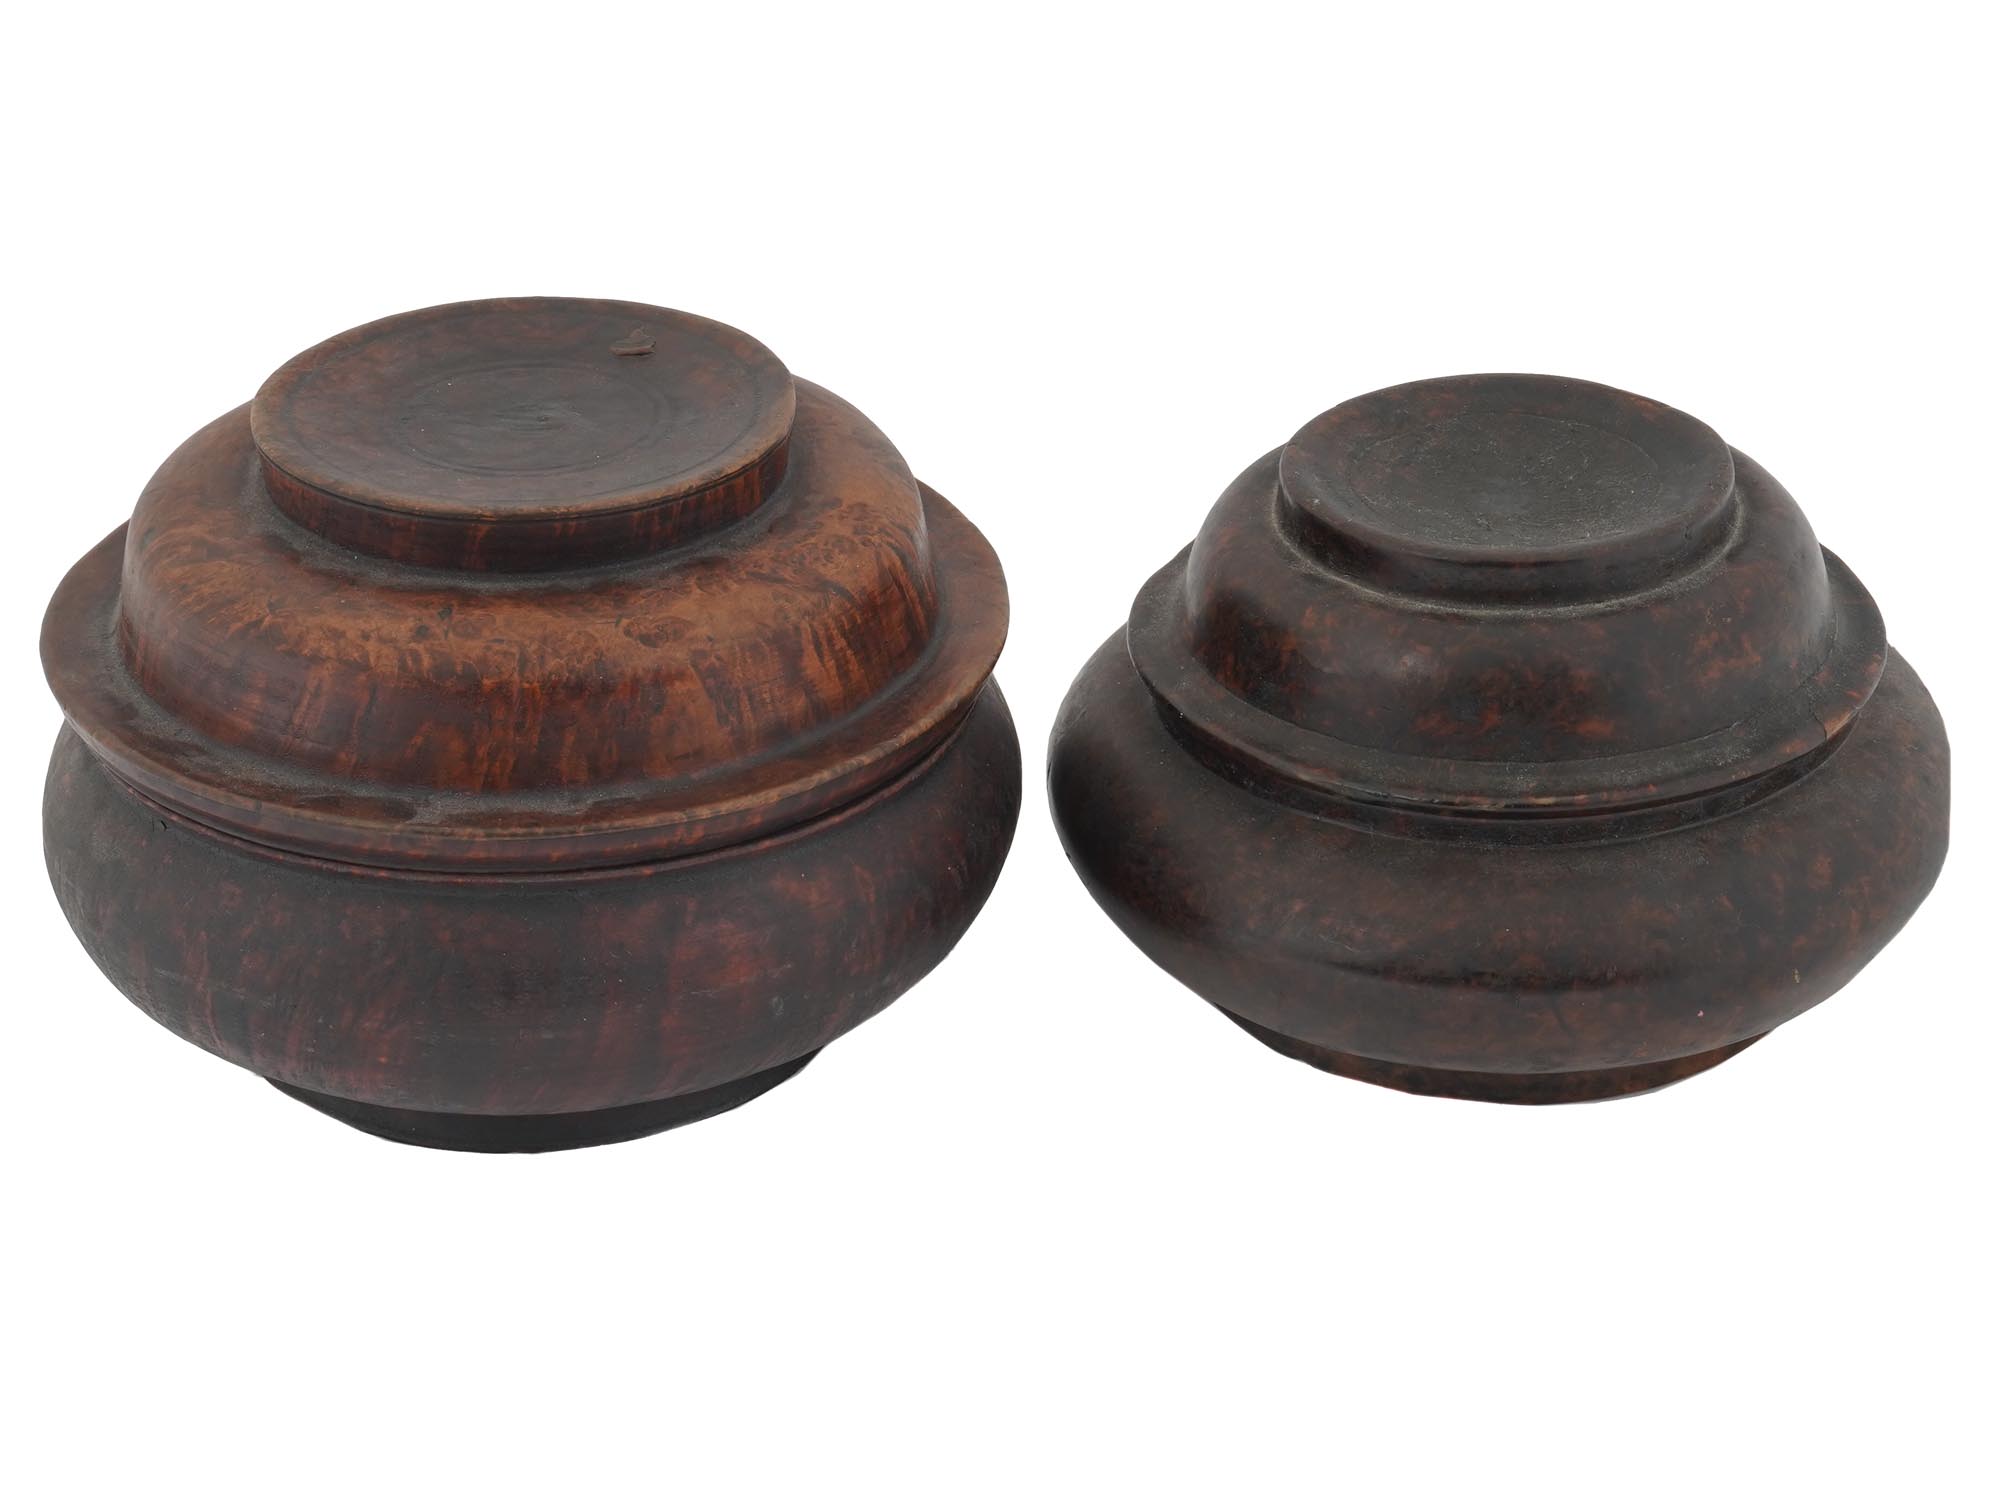 ANTIQUE NEPALESE LACQUERED WOOD SPICE CONTAINERS PIC-0